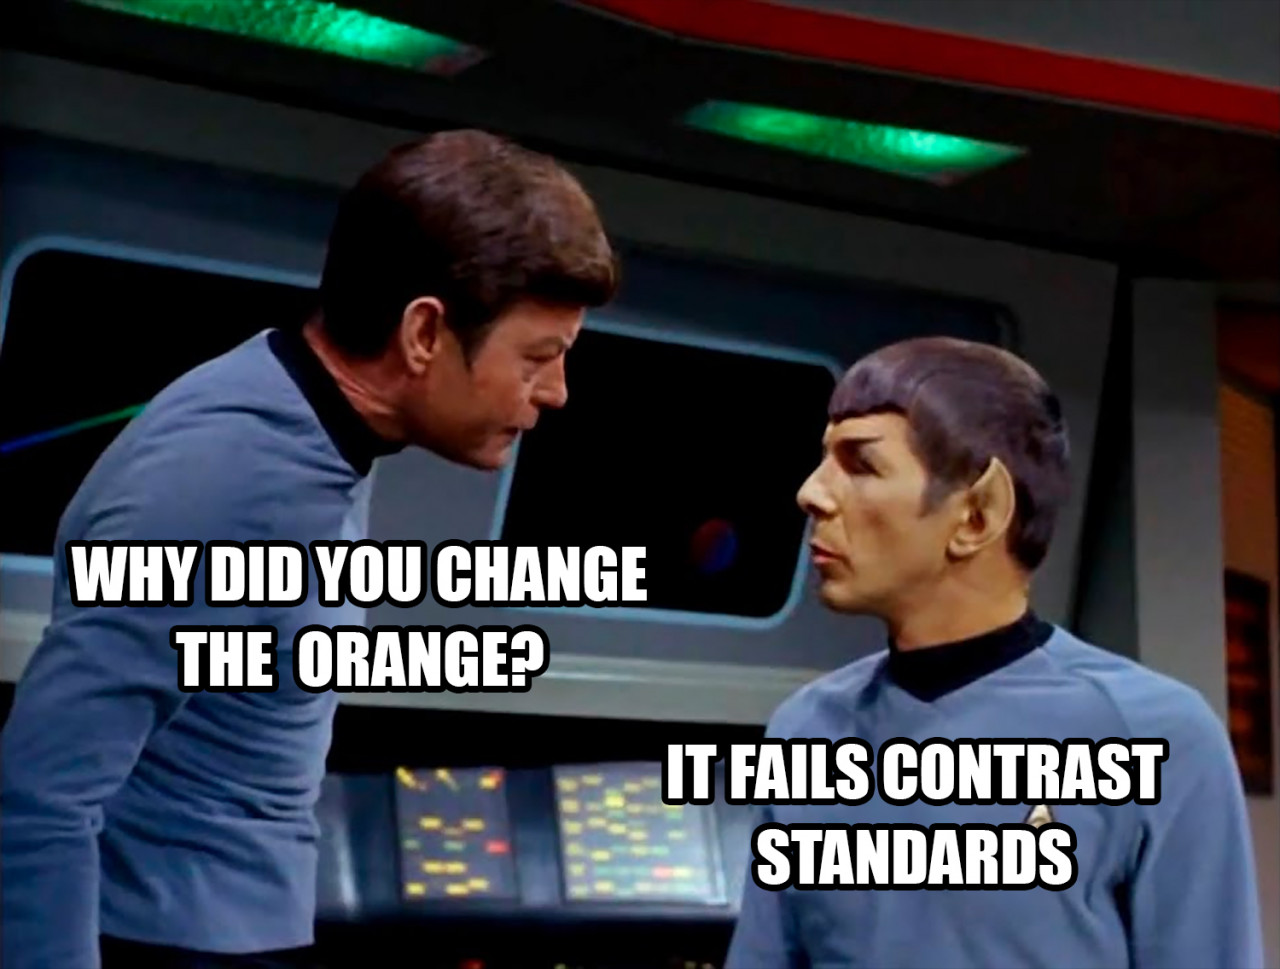 Star Trek characters on the bridge discuss design. McCoy: "Why did you change the orange?" Spock: "It fails contrast standards"